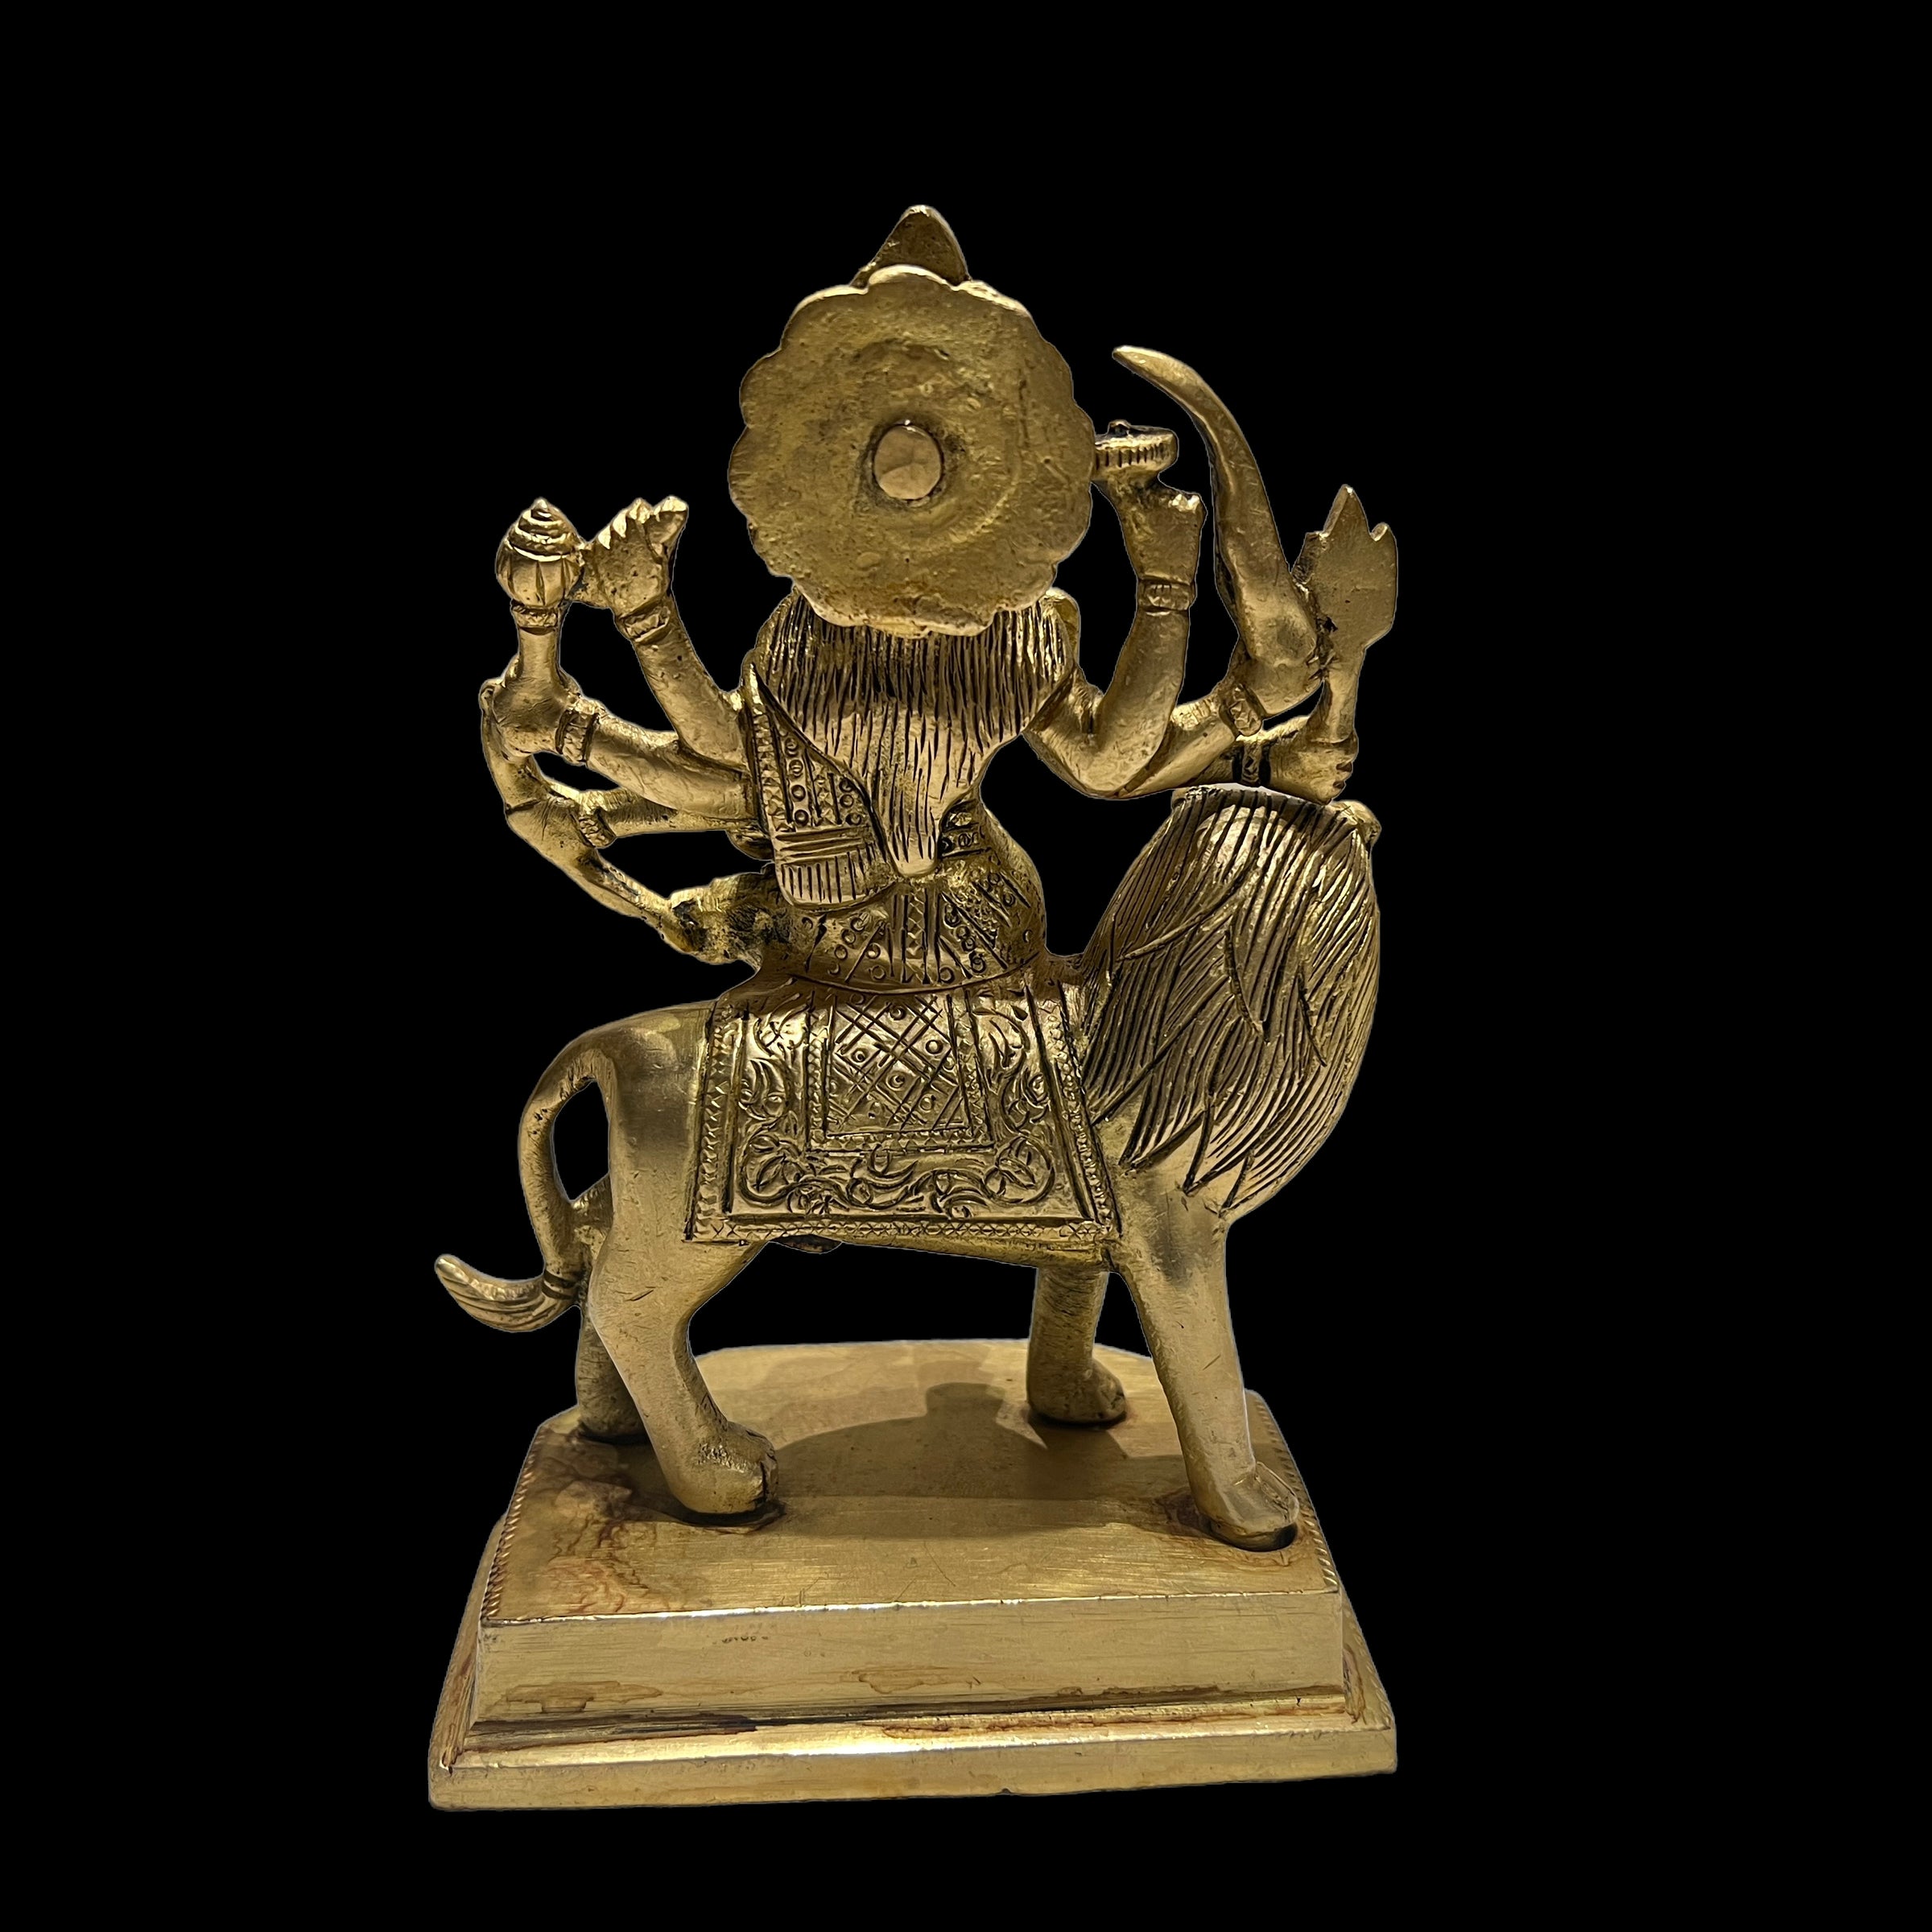 GM Brass Durga 1520- 7 in - Vintage India NYC